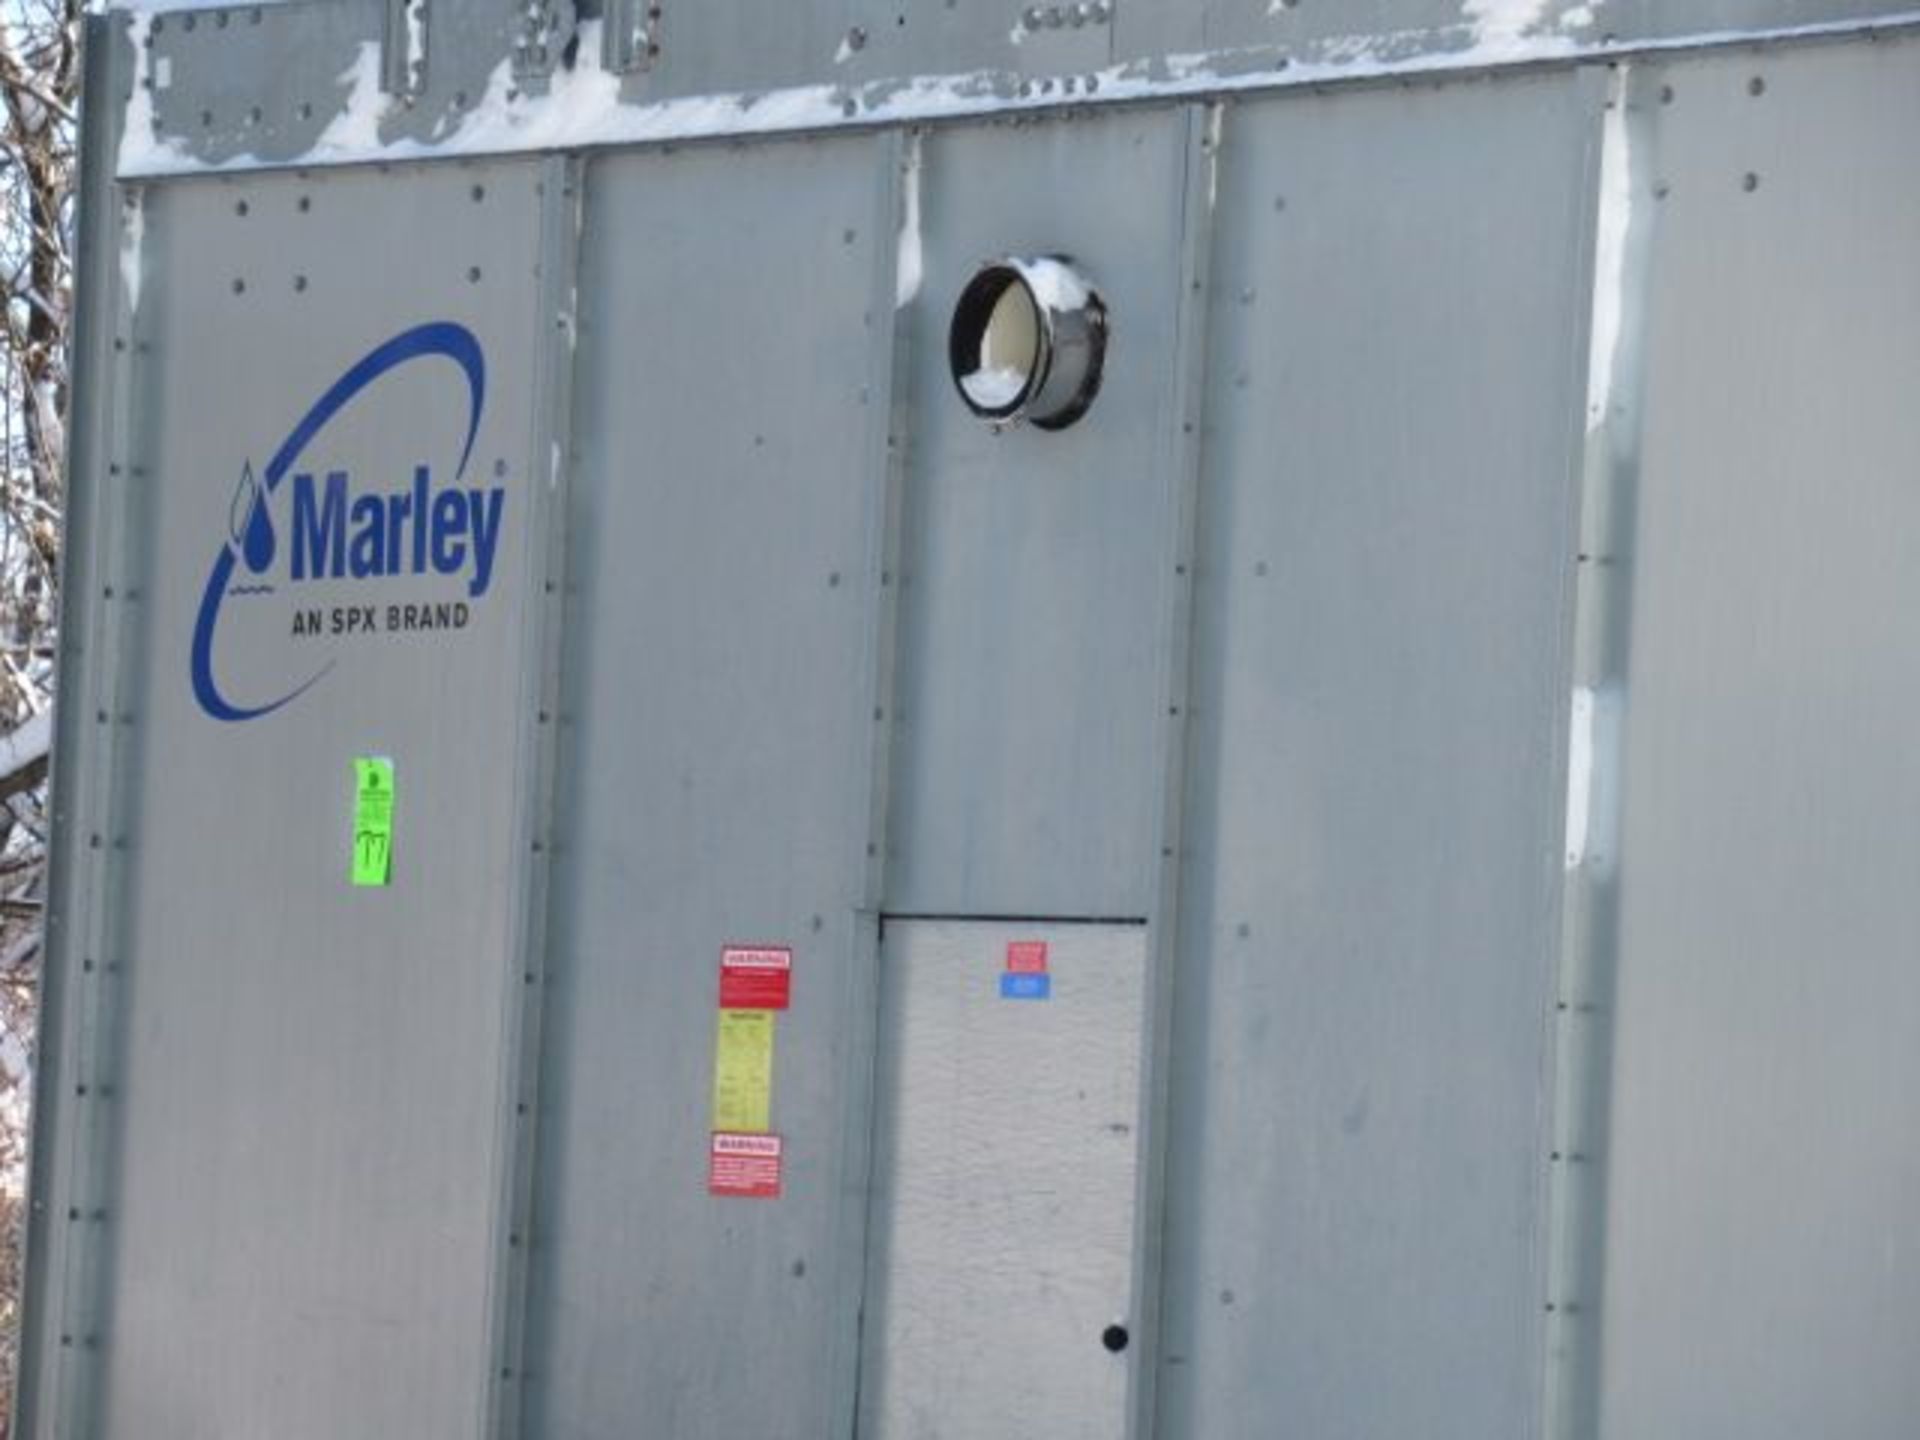 MARLEY Cooling Tower 10020311-A1-C8403MF-10 NC, New, Never Installed ($200 Rigging Cost)